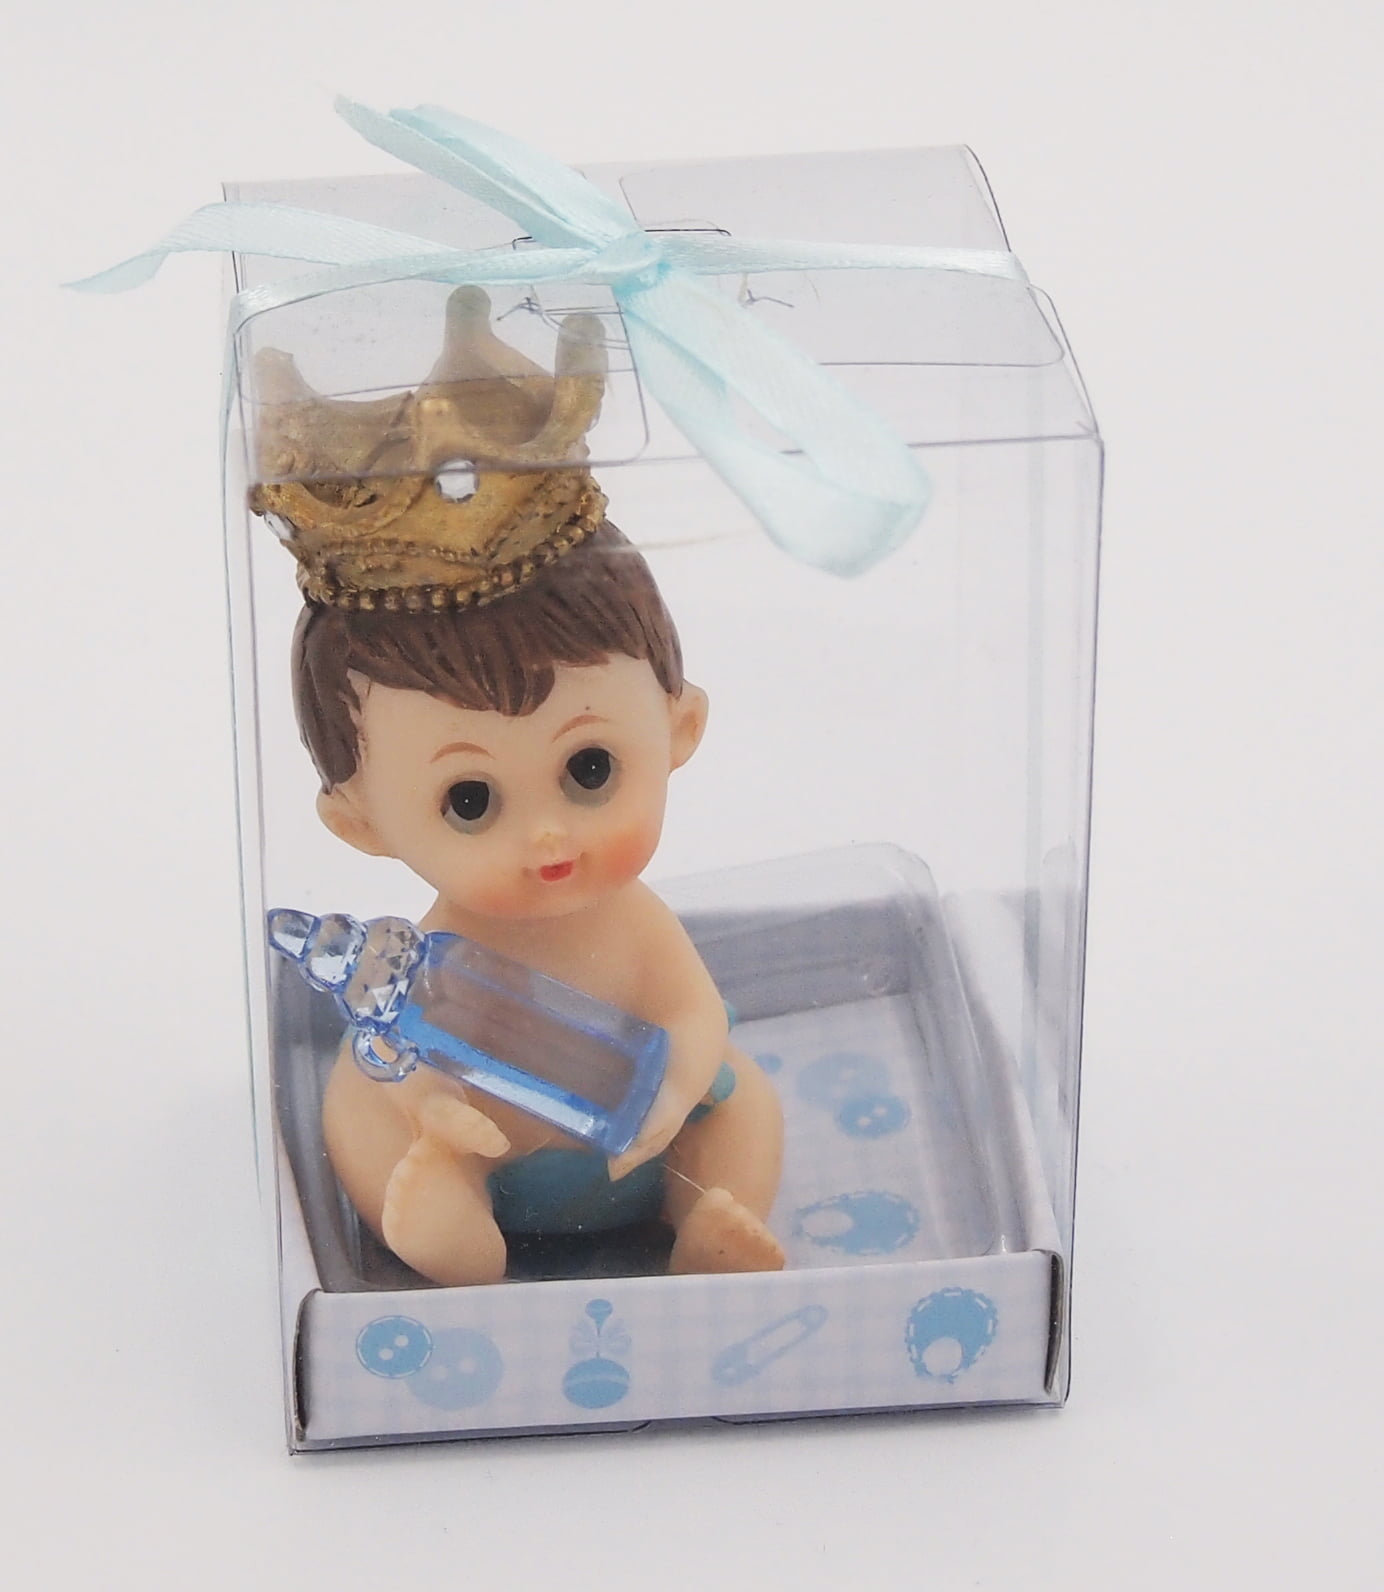 Details about  / 12pc Baby Pram Favour Box Gift Box for Baby Shower Christening Thank you bag